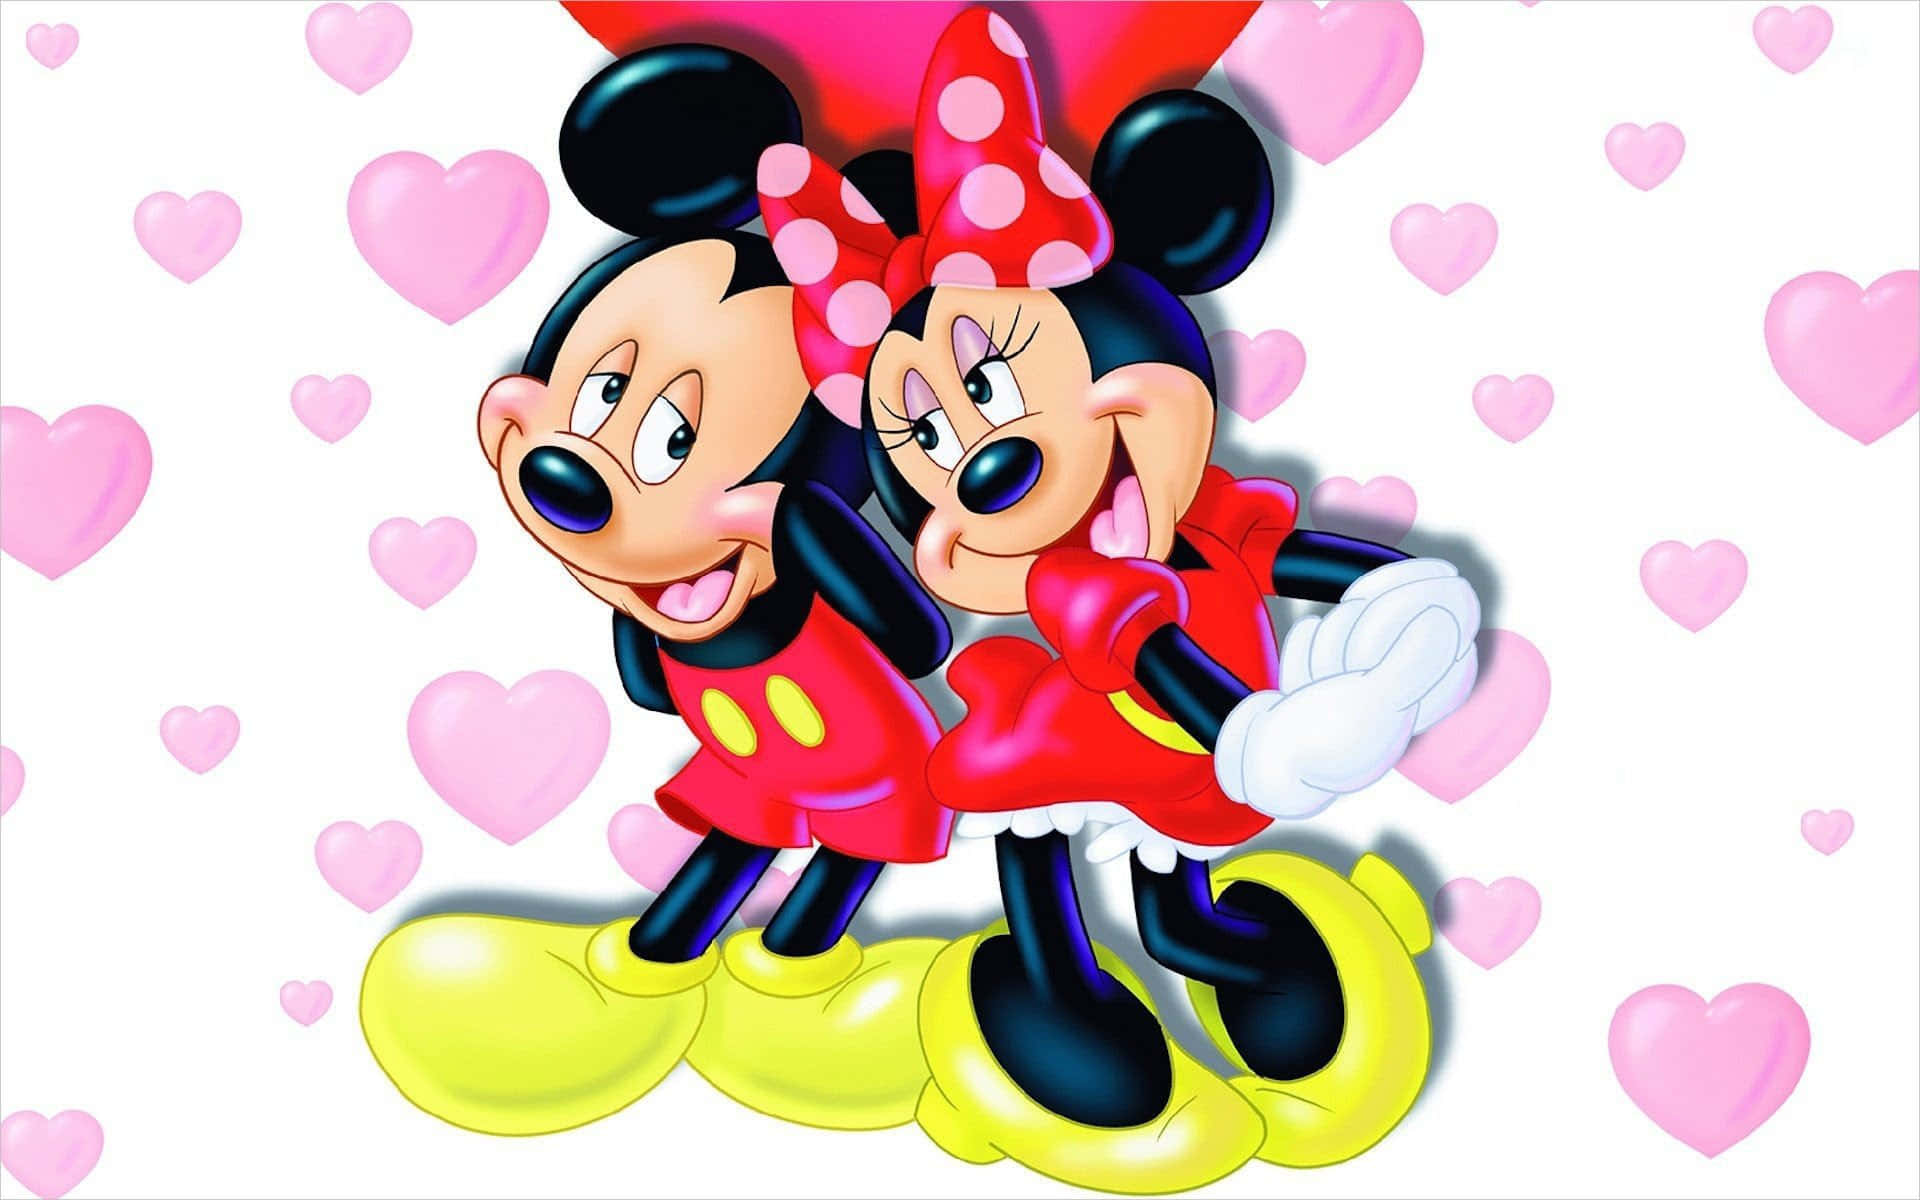 Mickey Mouse, the loveable cartoon icon